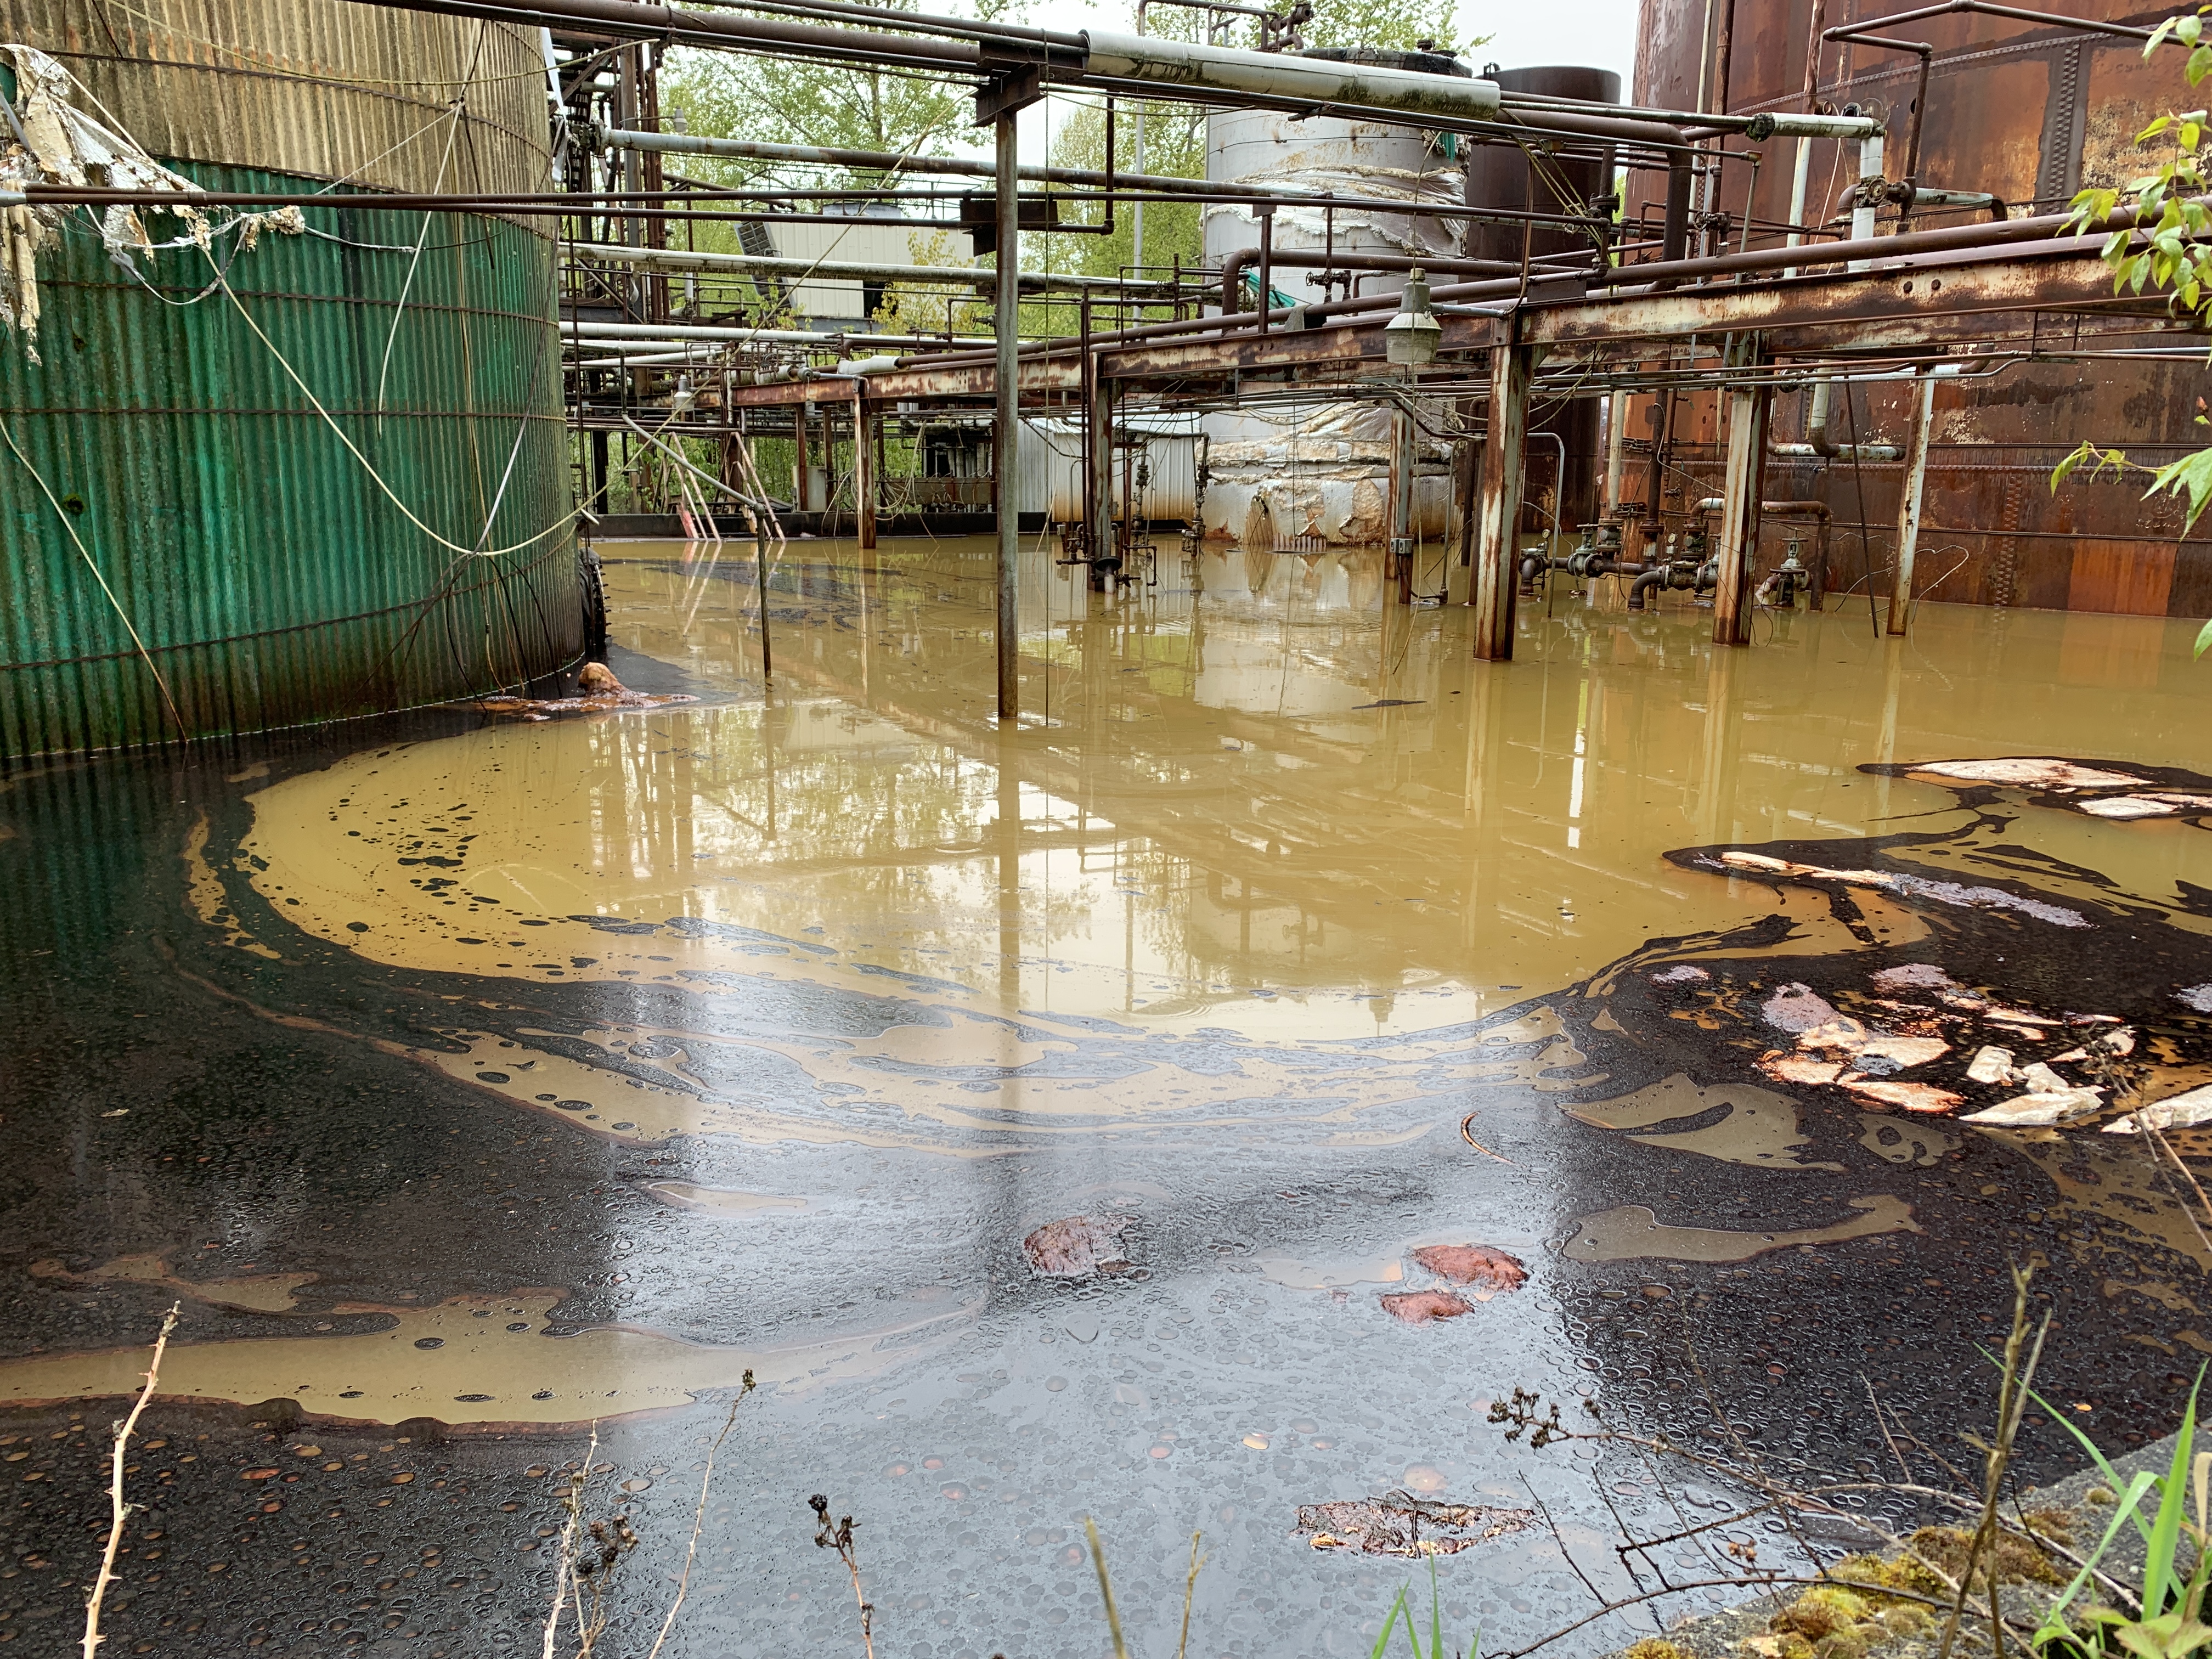 Large tanks stand in a pool of oily liquid.